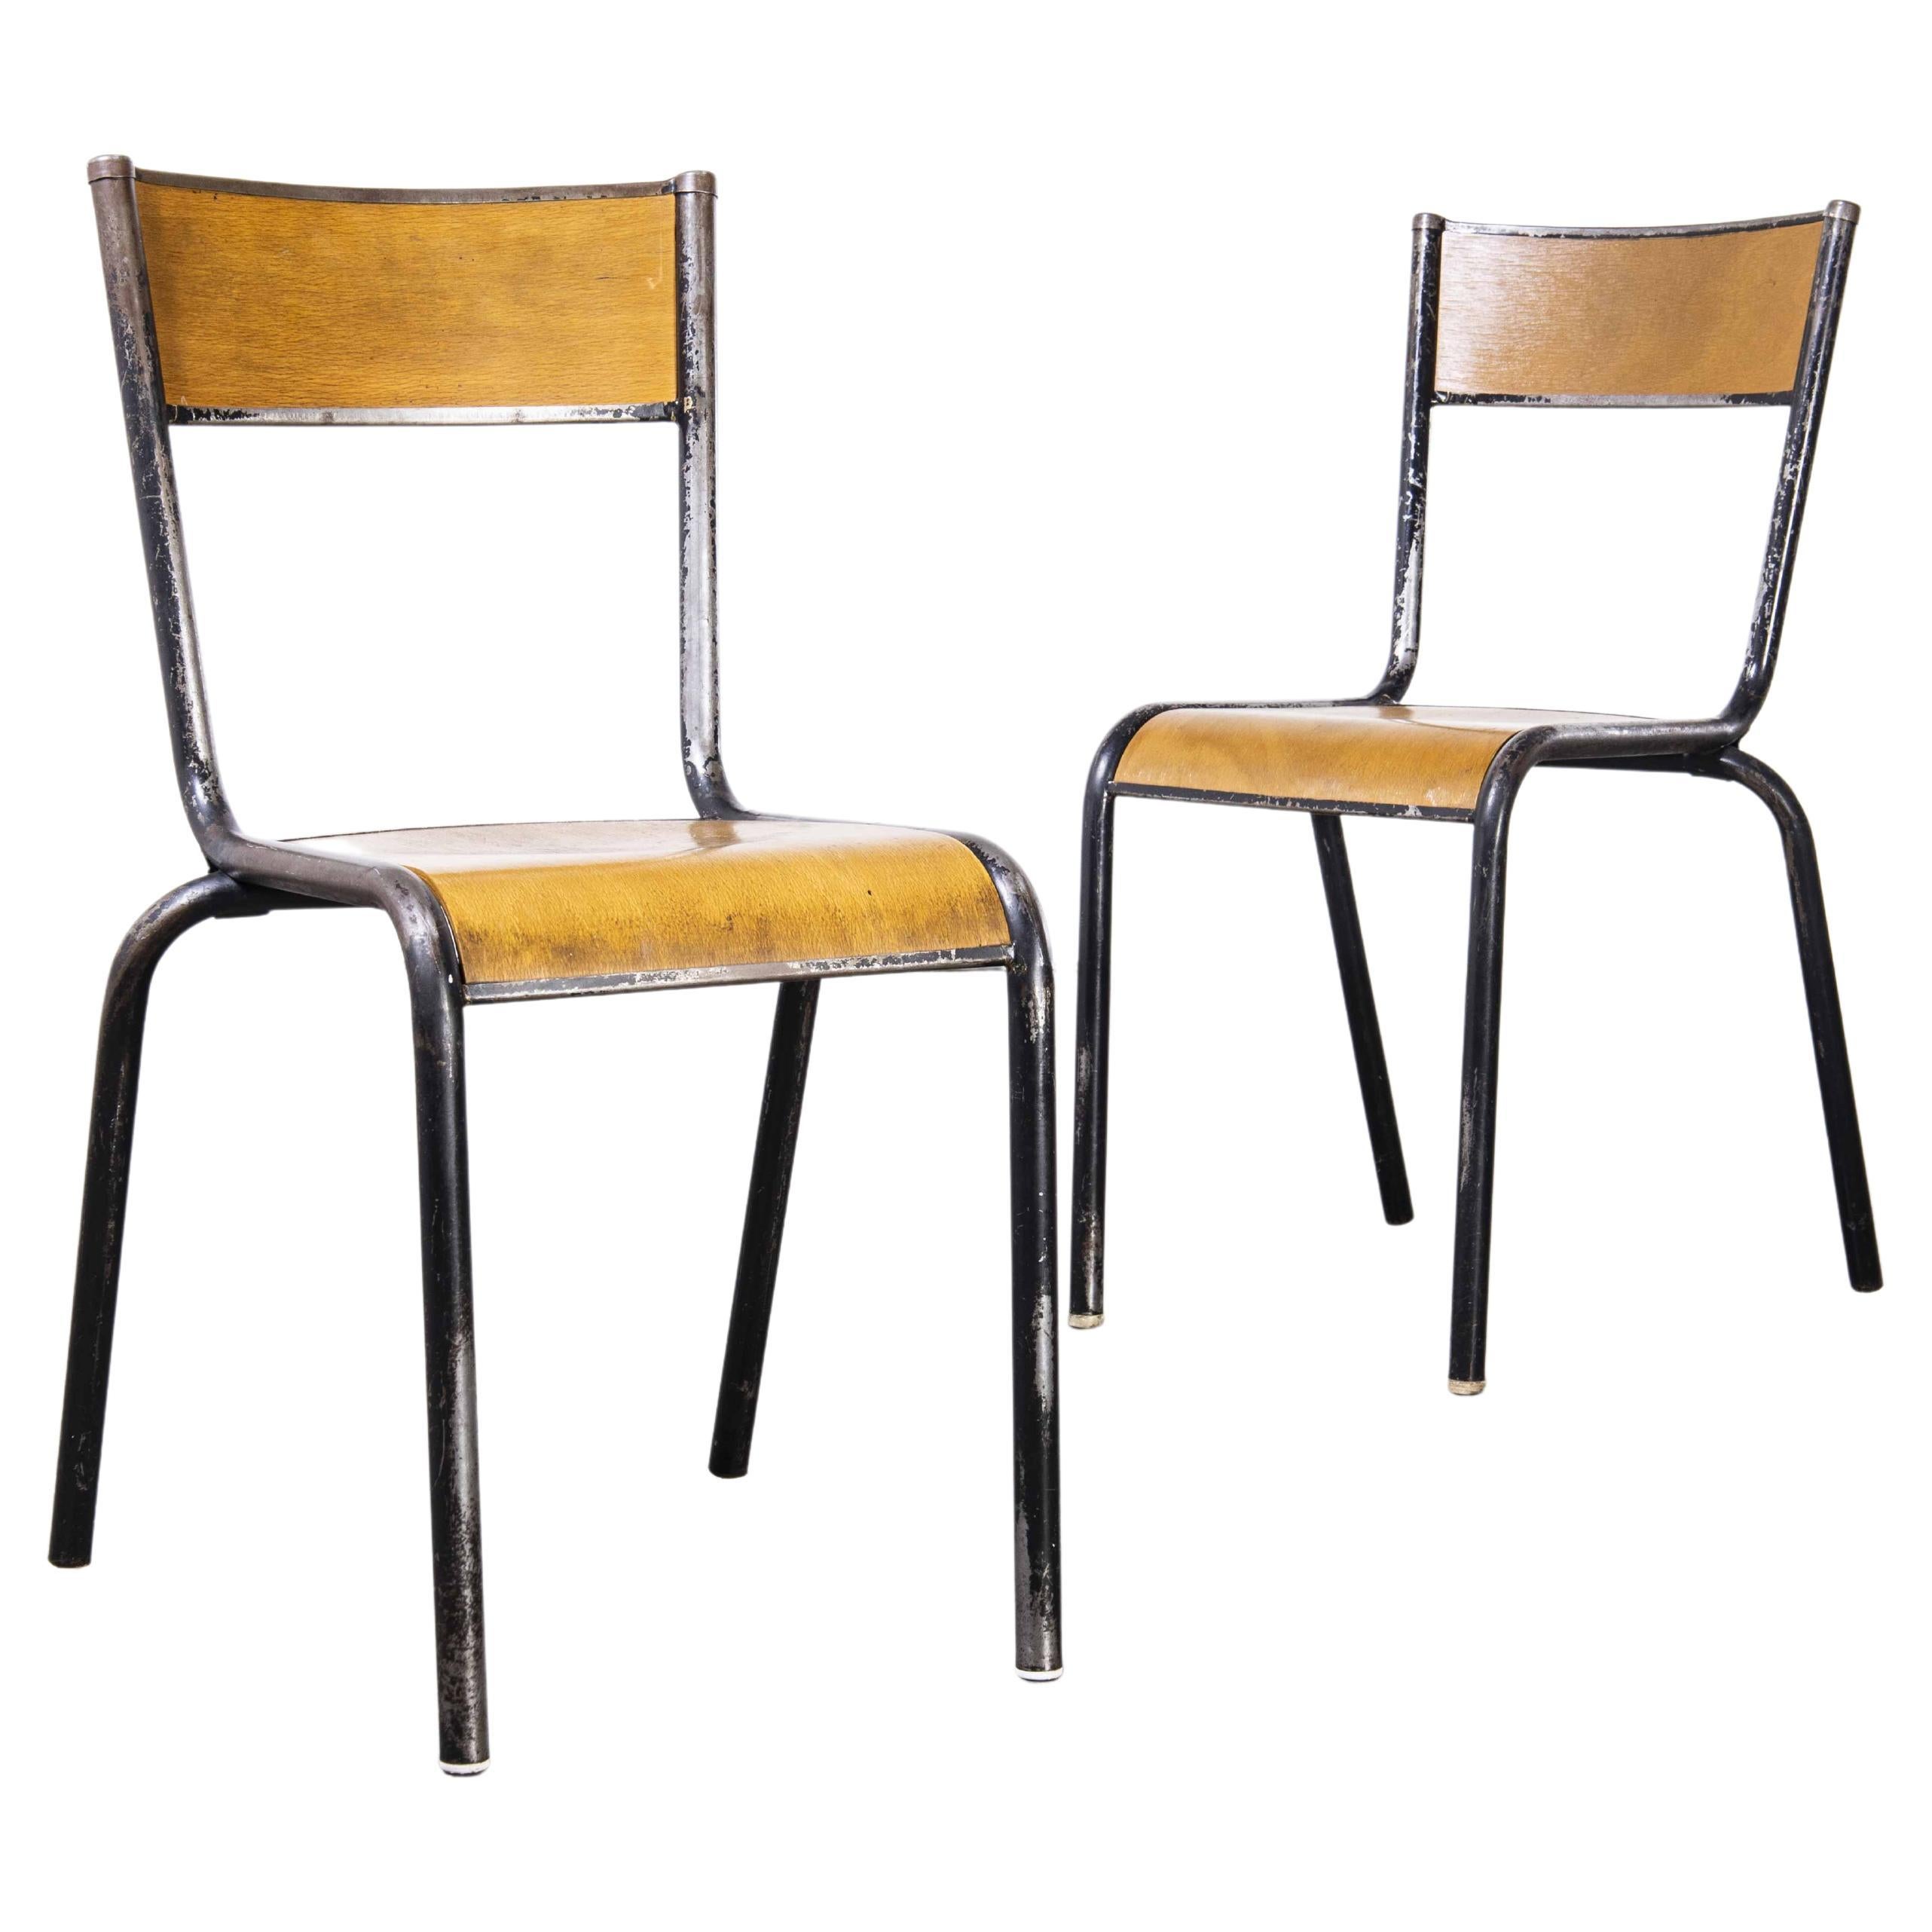 1960's, French Mullca Stacking Chair, Black Frame, Pair